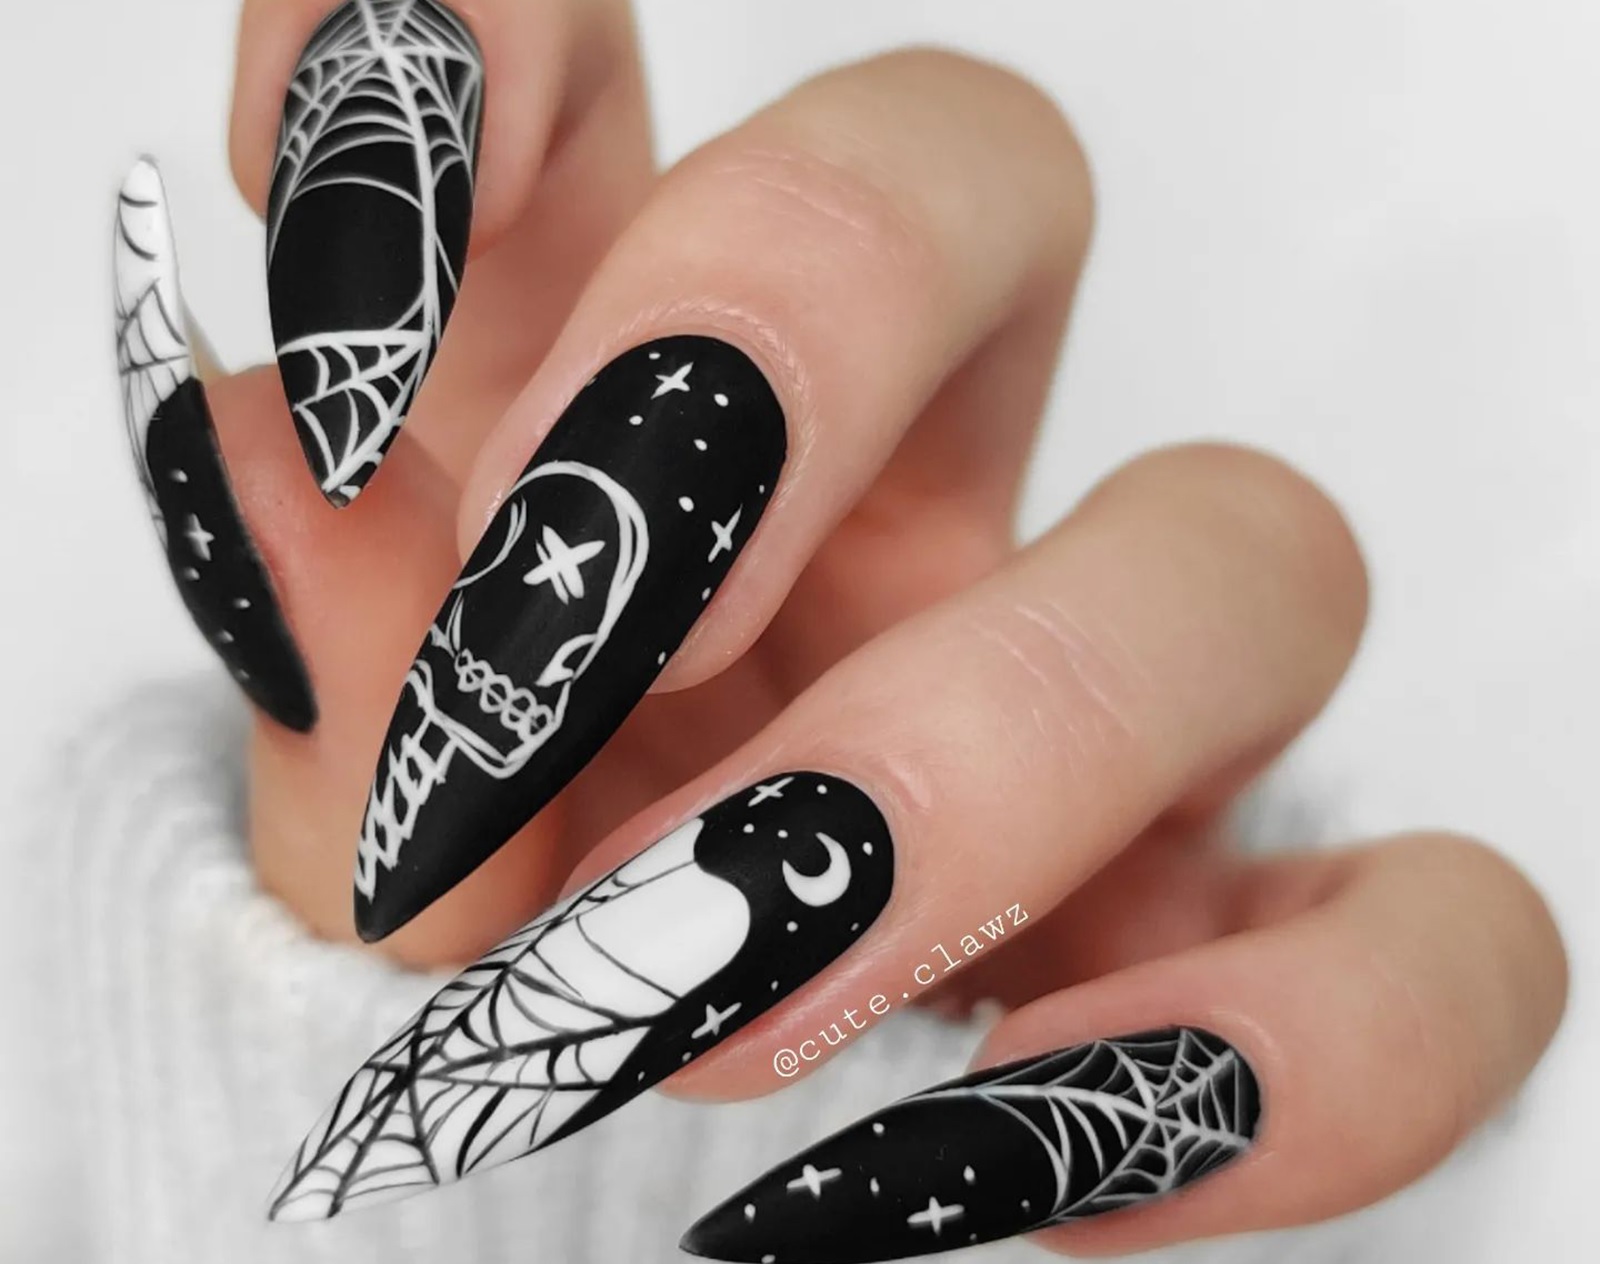 26 Trending Black Stiletto Nails Designs for the Real Baddies